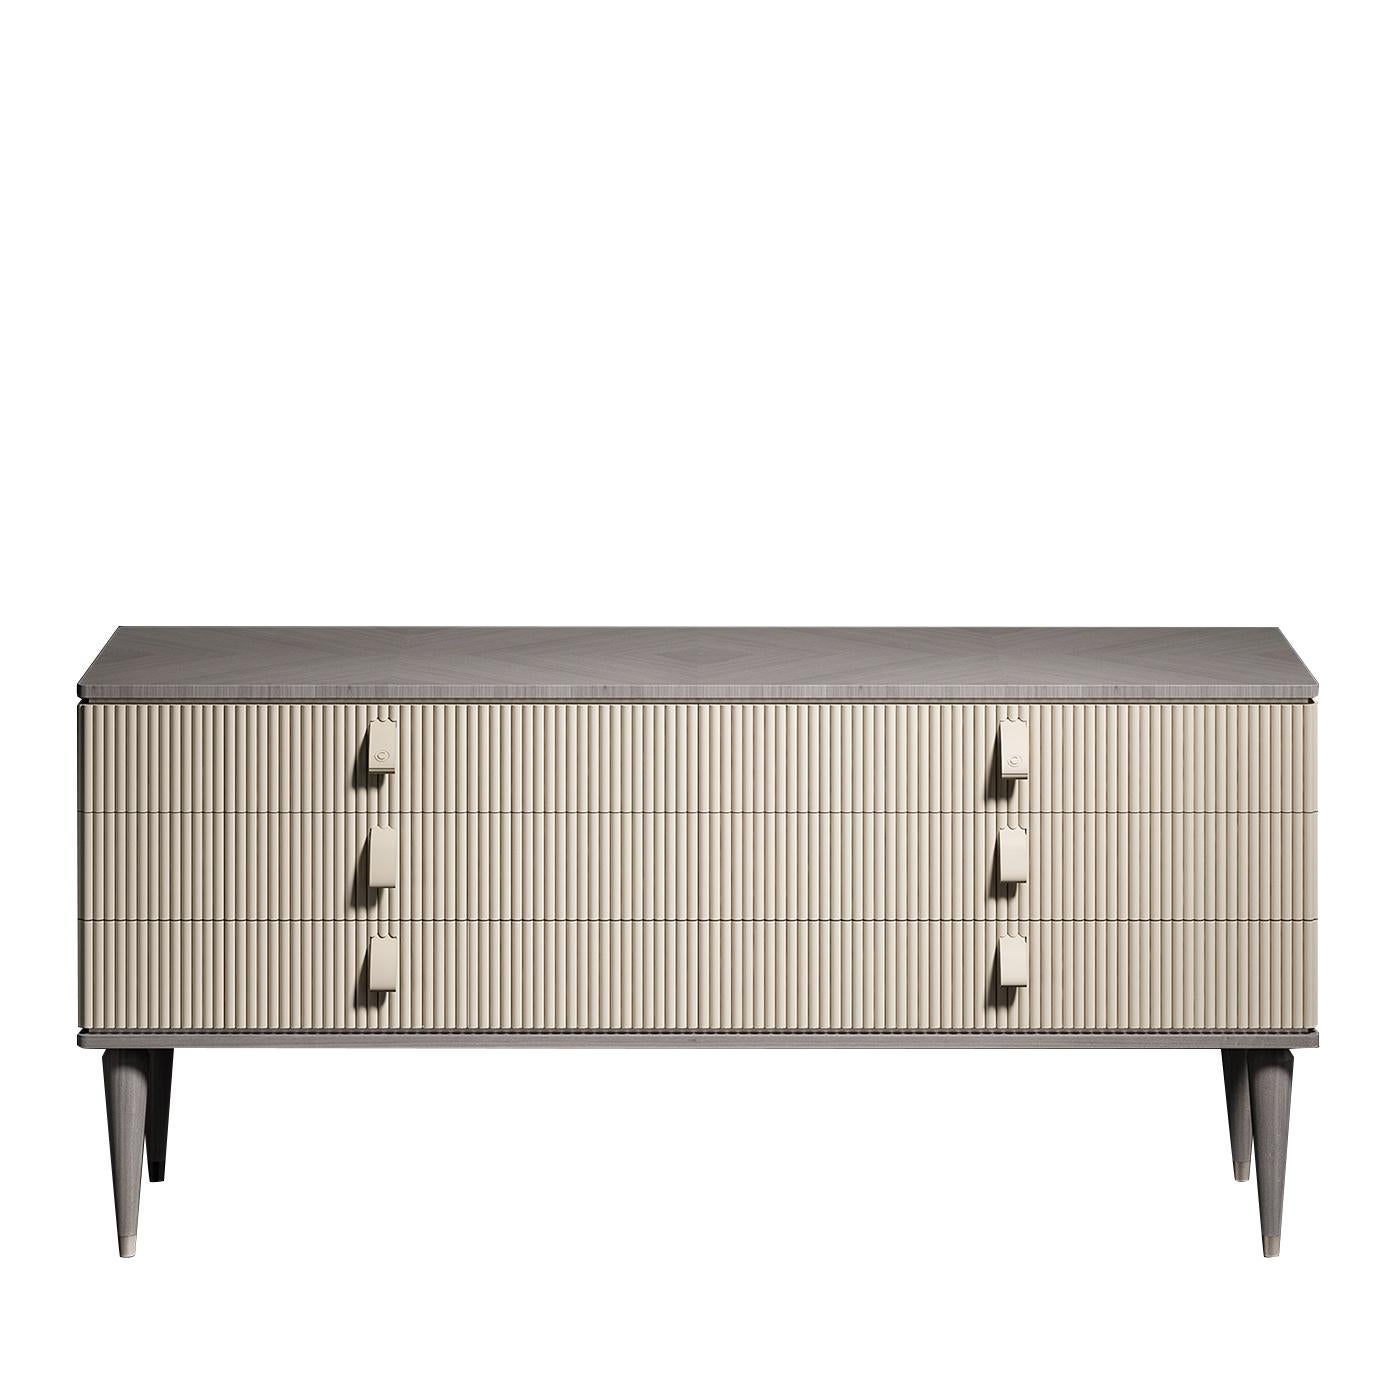 Distinguished for its clean edges and intricate panel detailing, this dresser exudes timeless elegance. Made entirely of wood, the rectangular frame has an inlay veneer at the top, brass-accented conical feet, and base in grey finish. The central